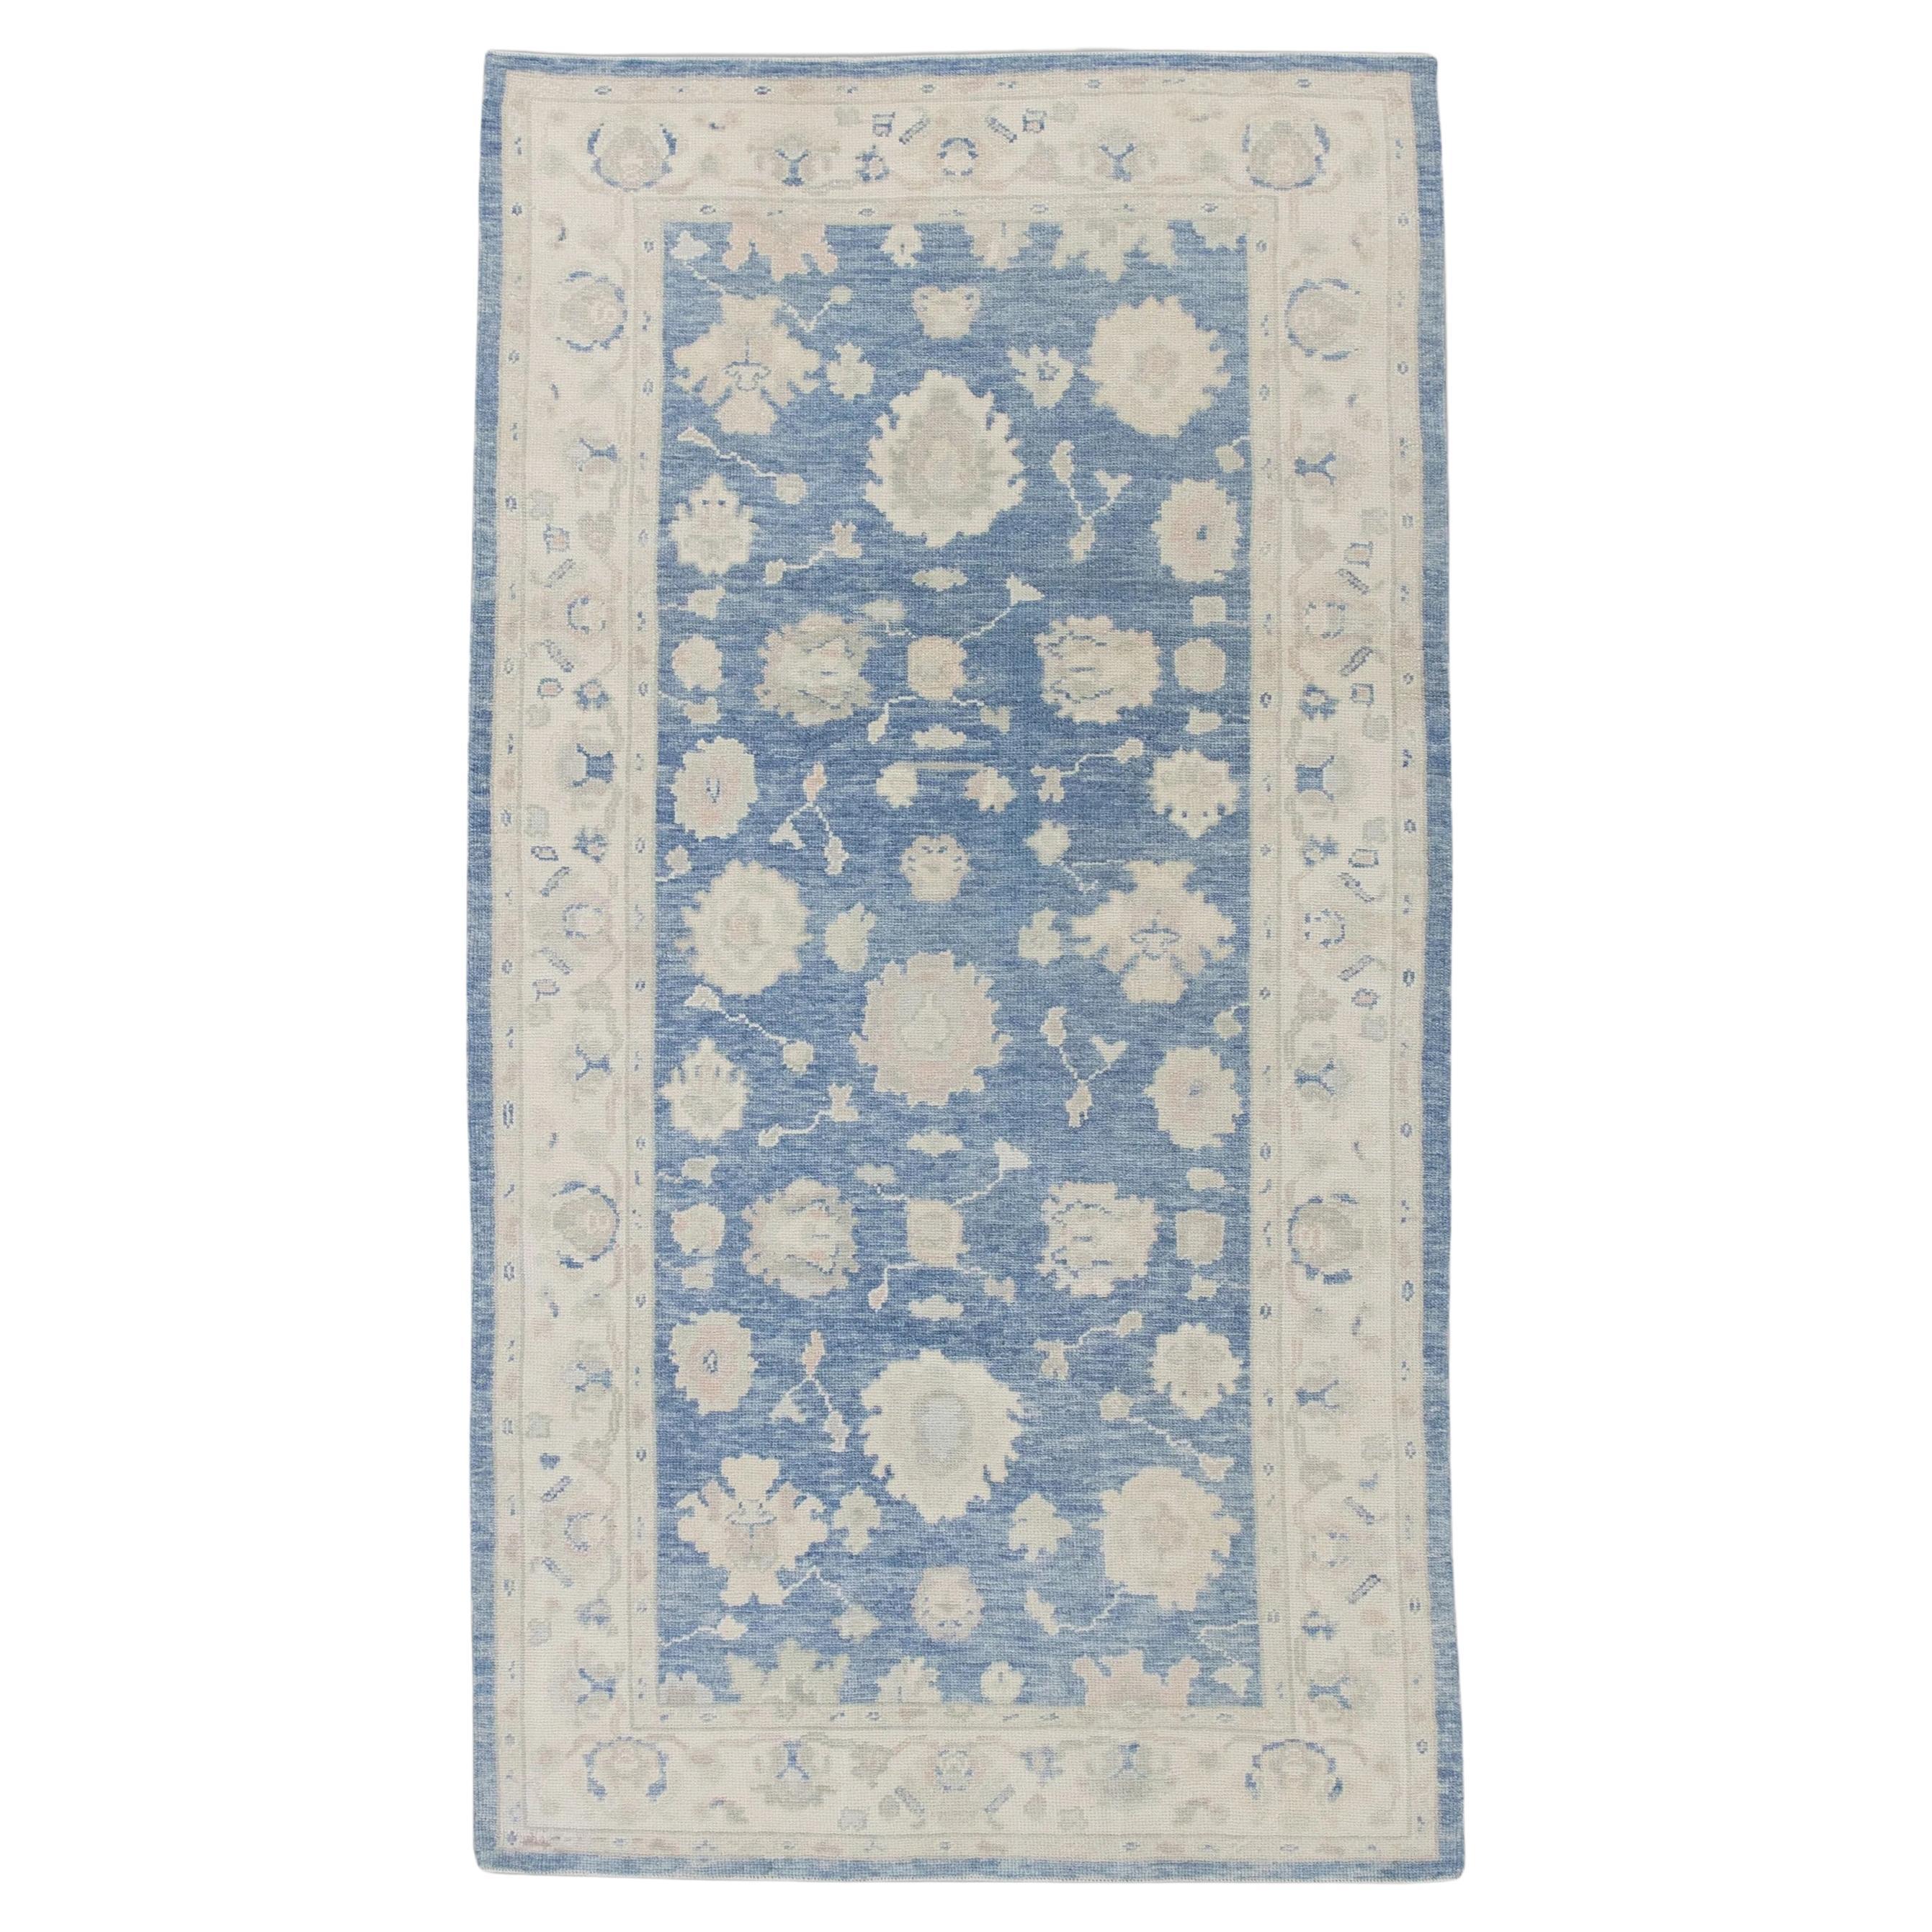 Blue Handwoven Wool Turkish Oushak Rug in Floral Design 5'1" x 9'5" For Sale